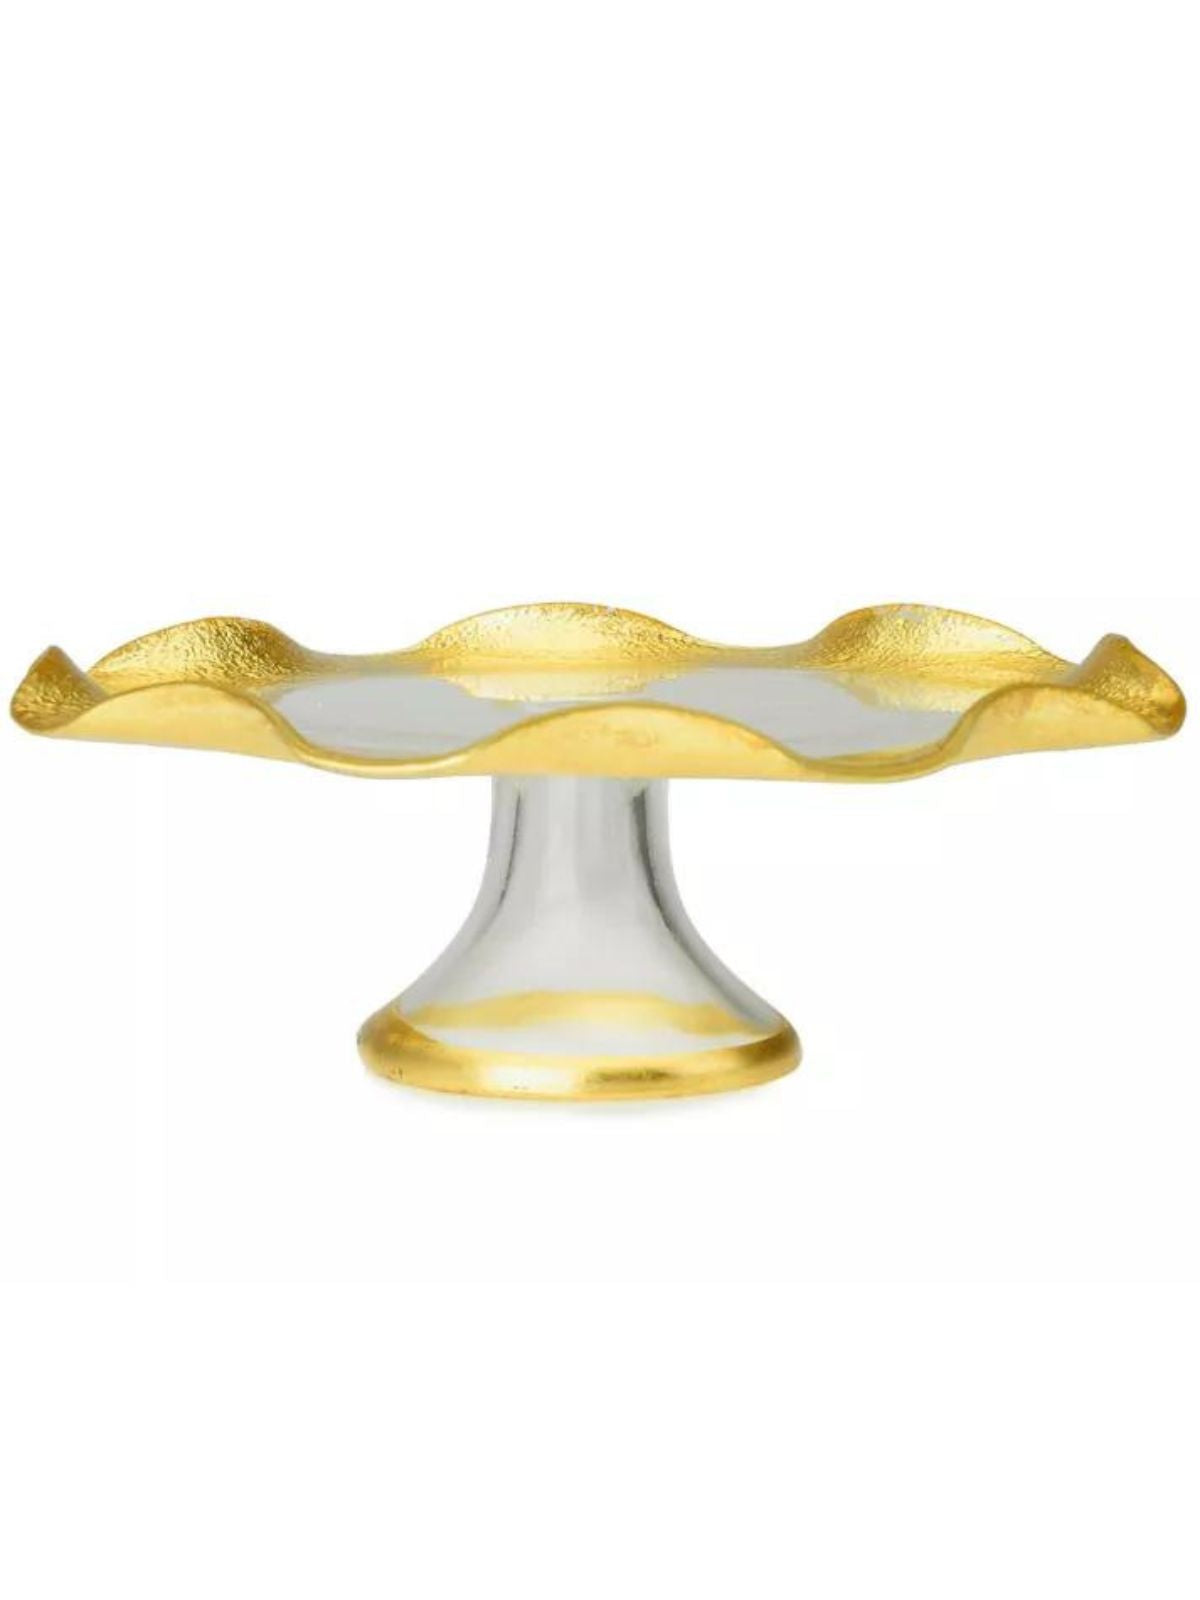 12D glass cake stand with luxurious wavy gold borders, Sold by KYA Home Decor.